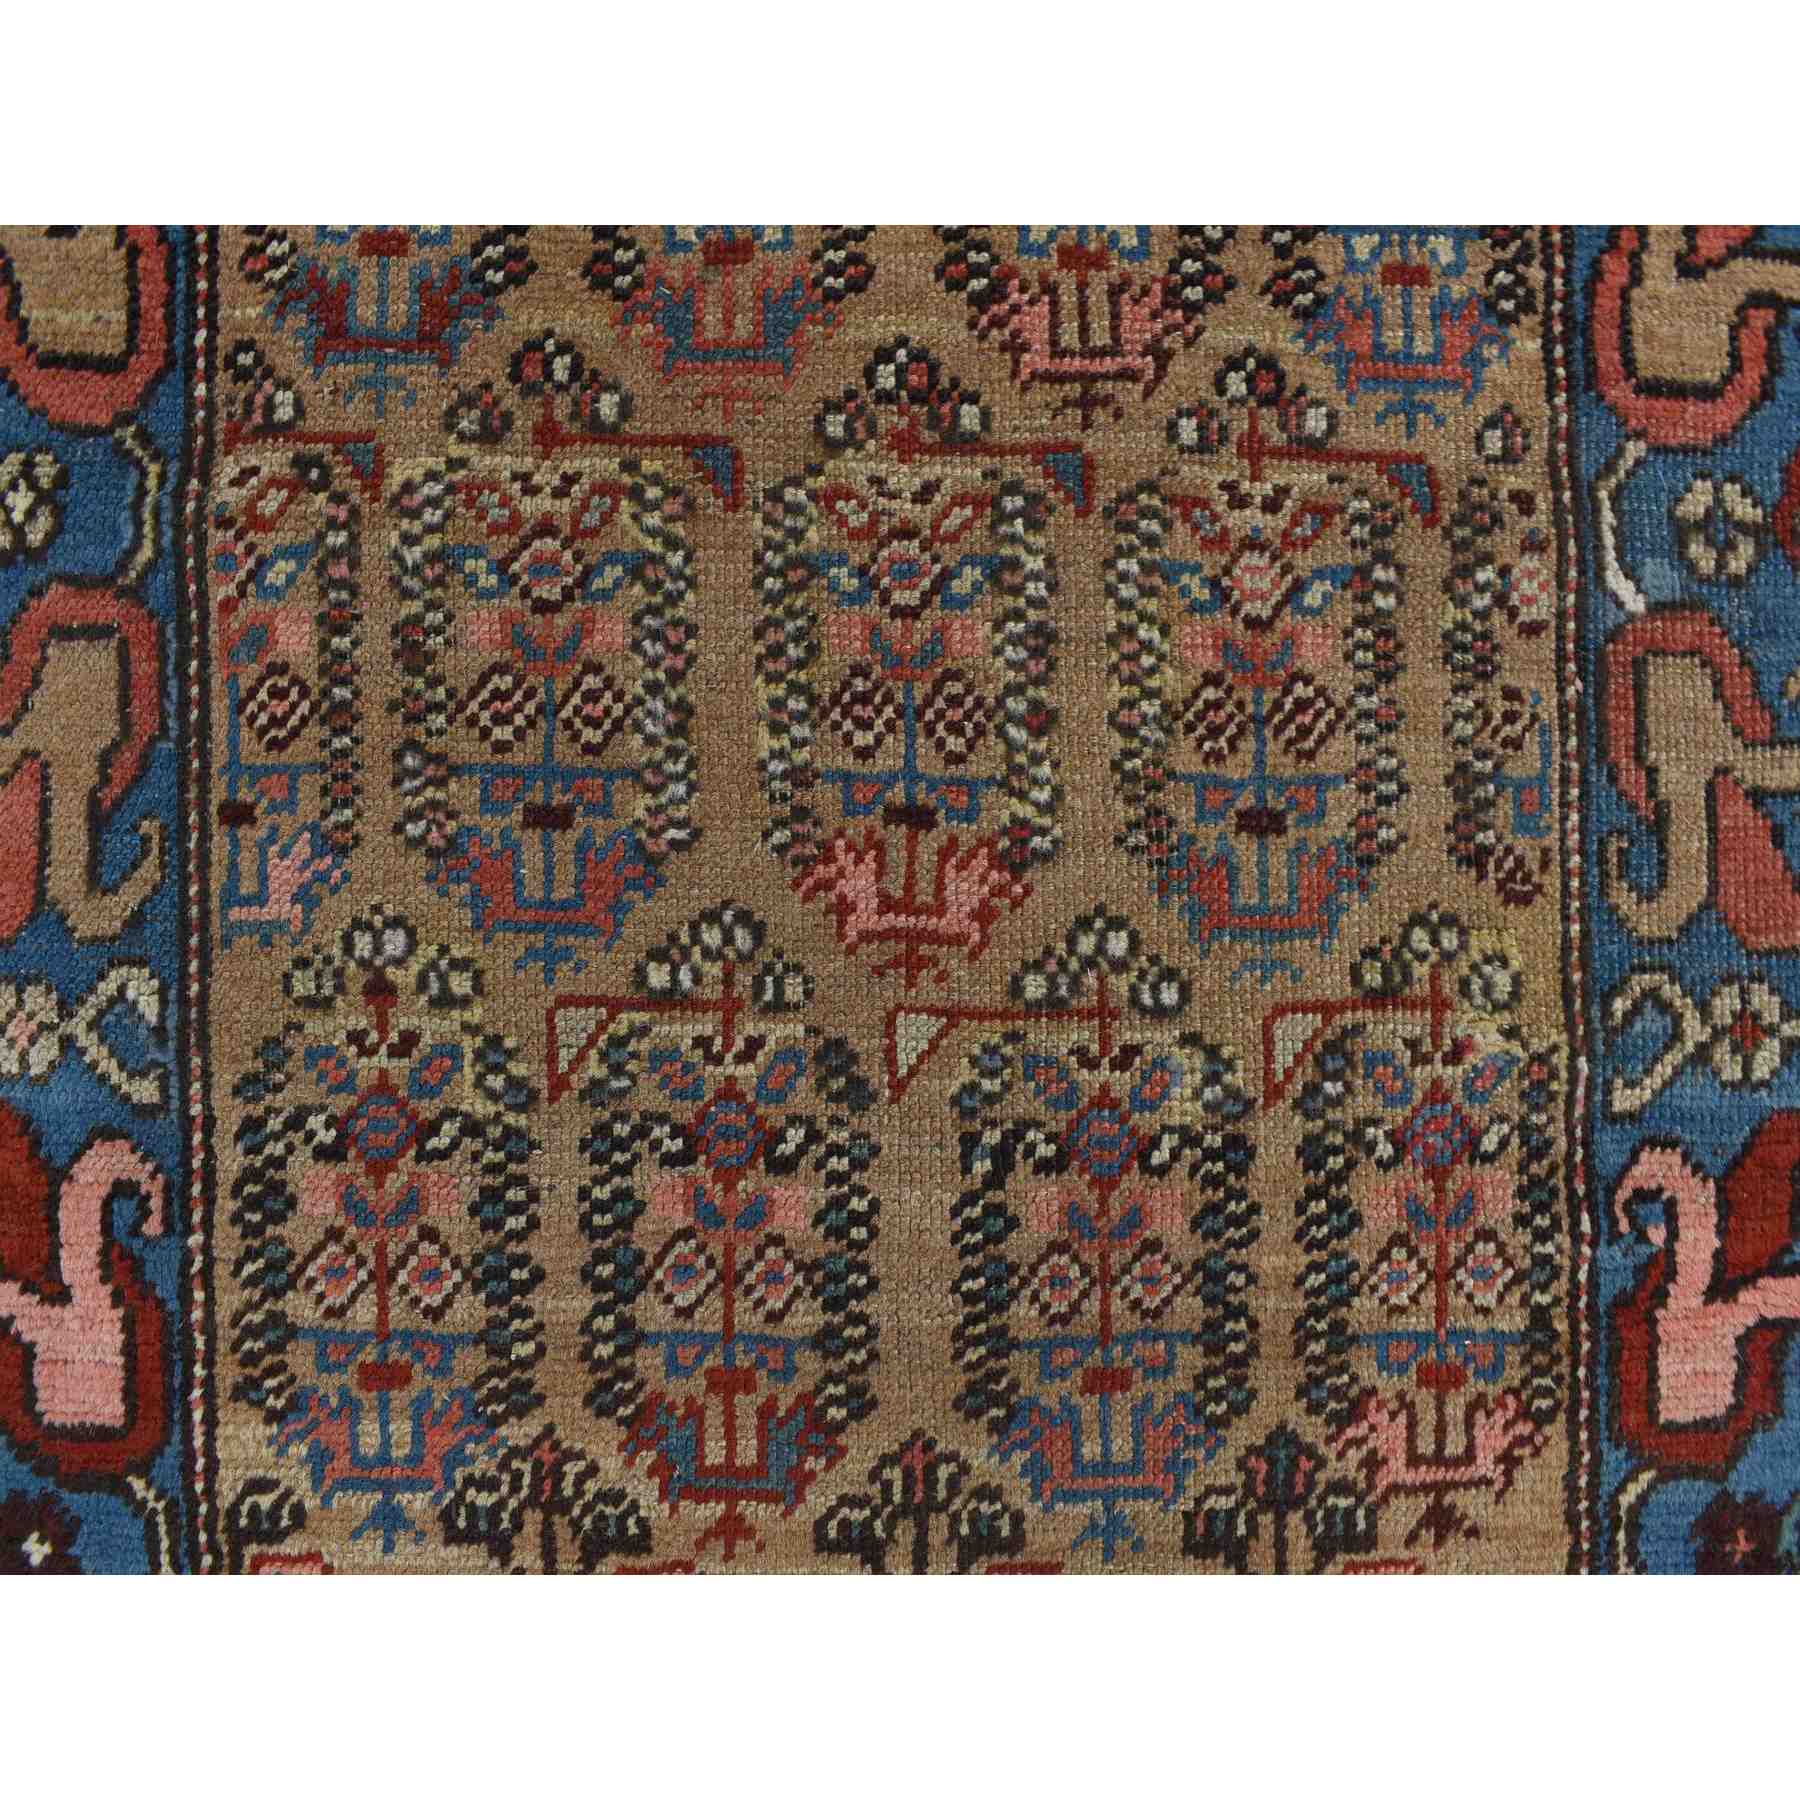 Antique-Hand-Knotted-Rug-390925